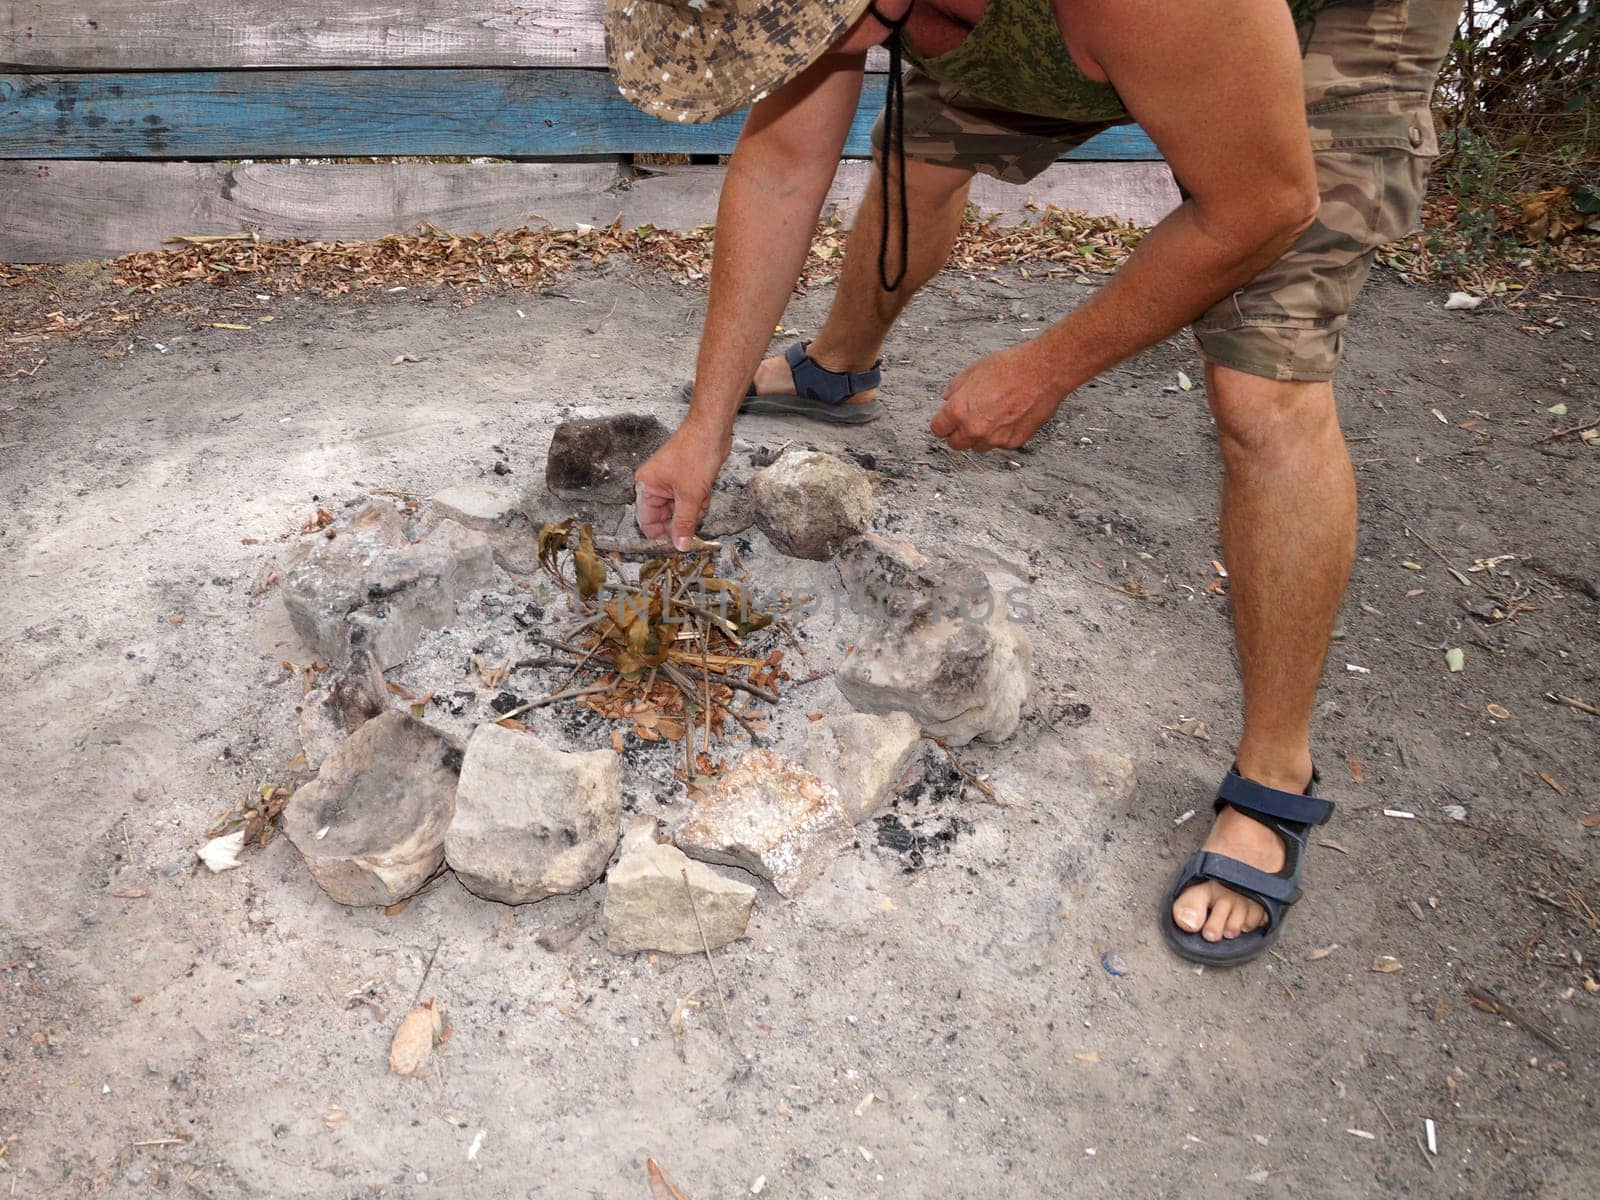 man preparing campfire with stones and twigs outdoors.